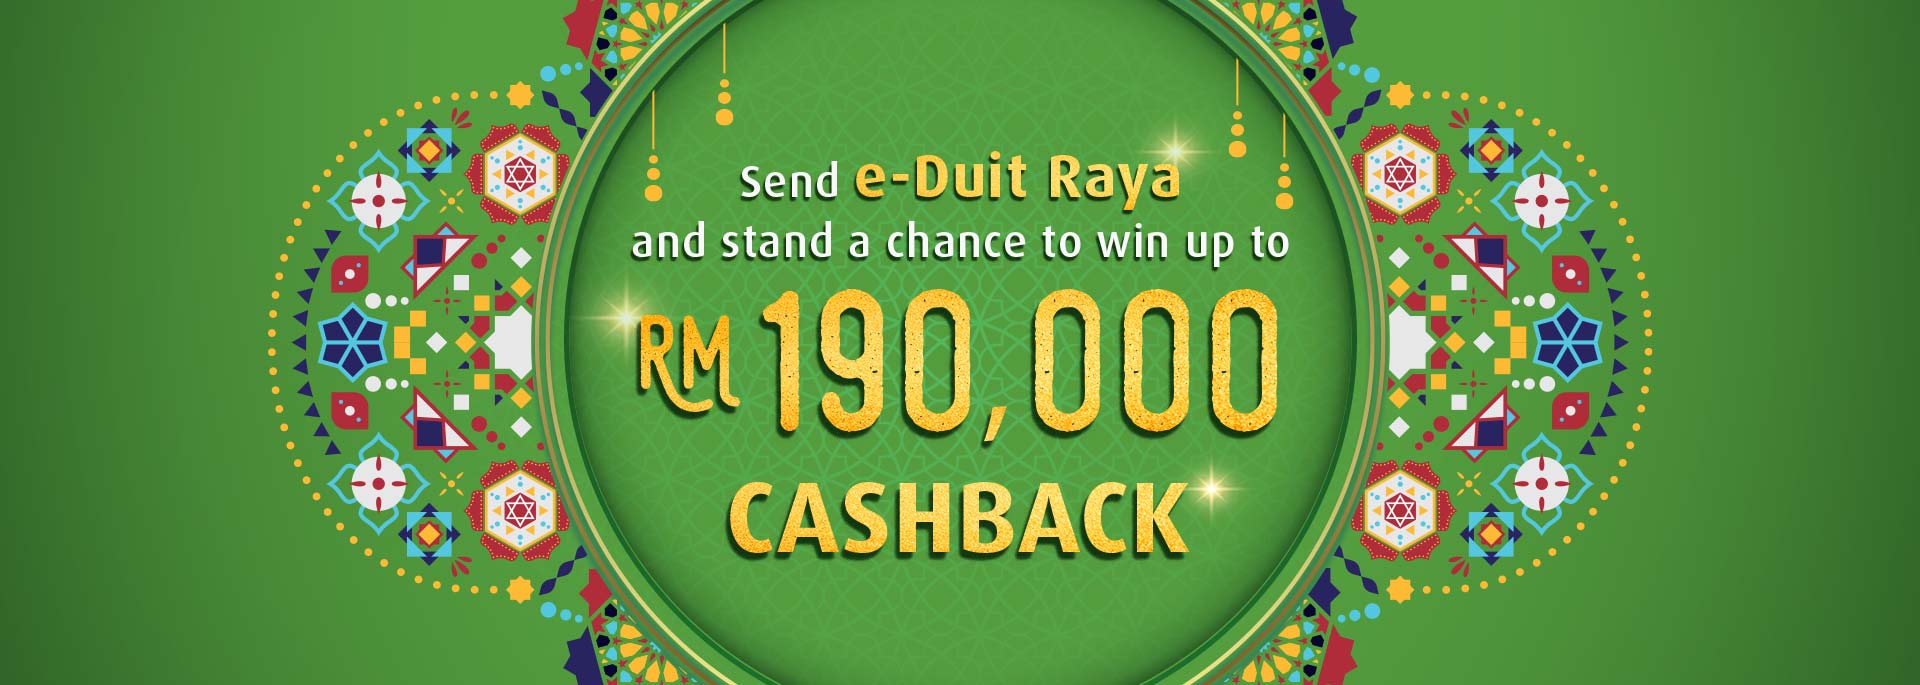 Send e-Duit Raya via HLB Connect App and get rewarded with cashback!